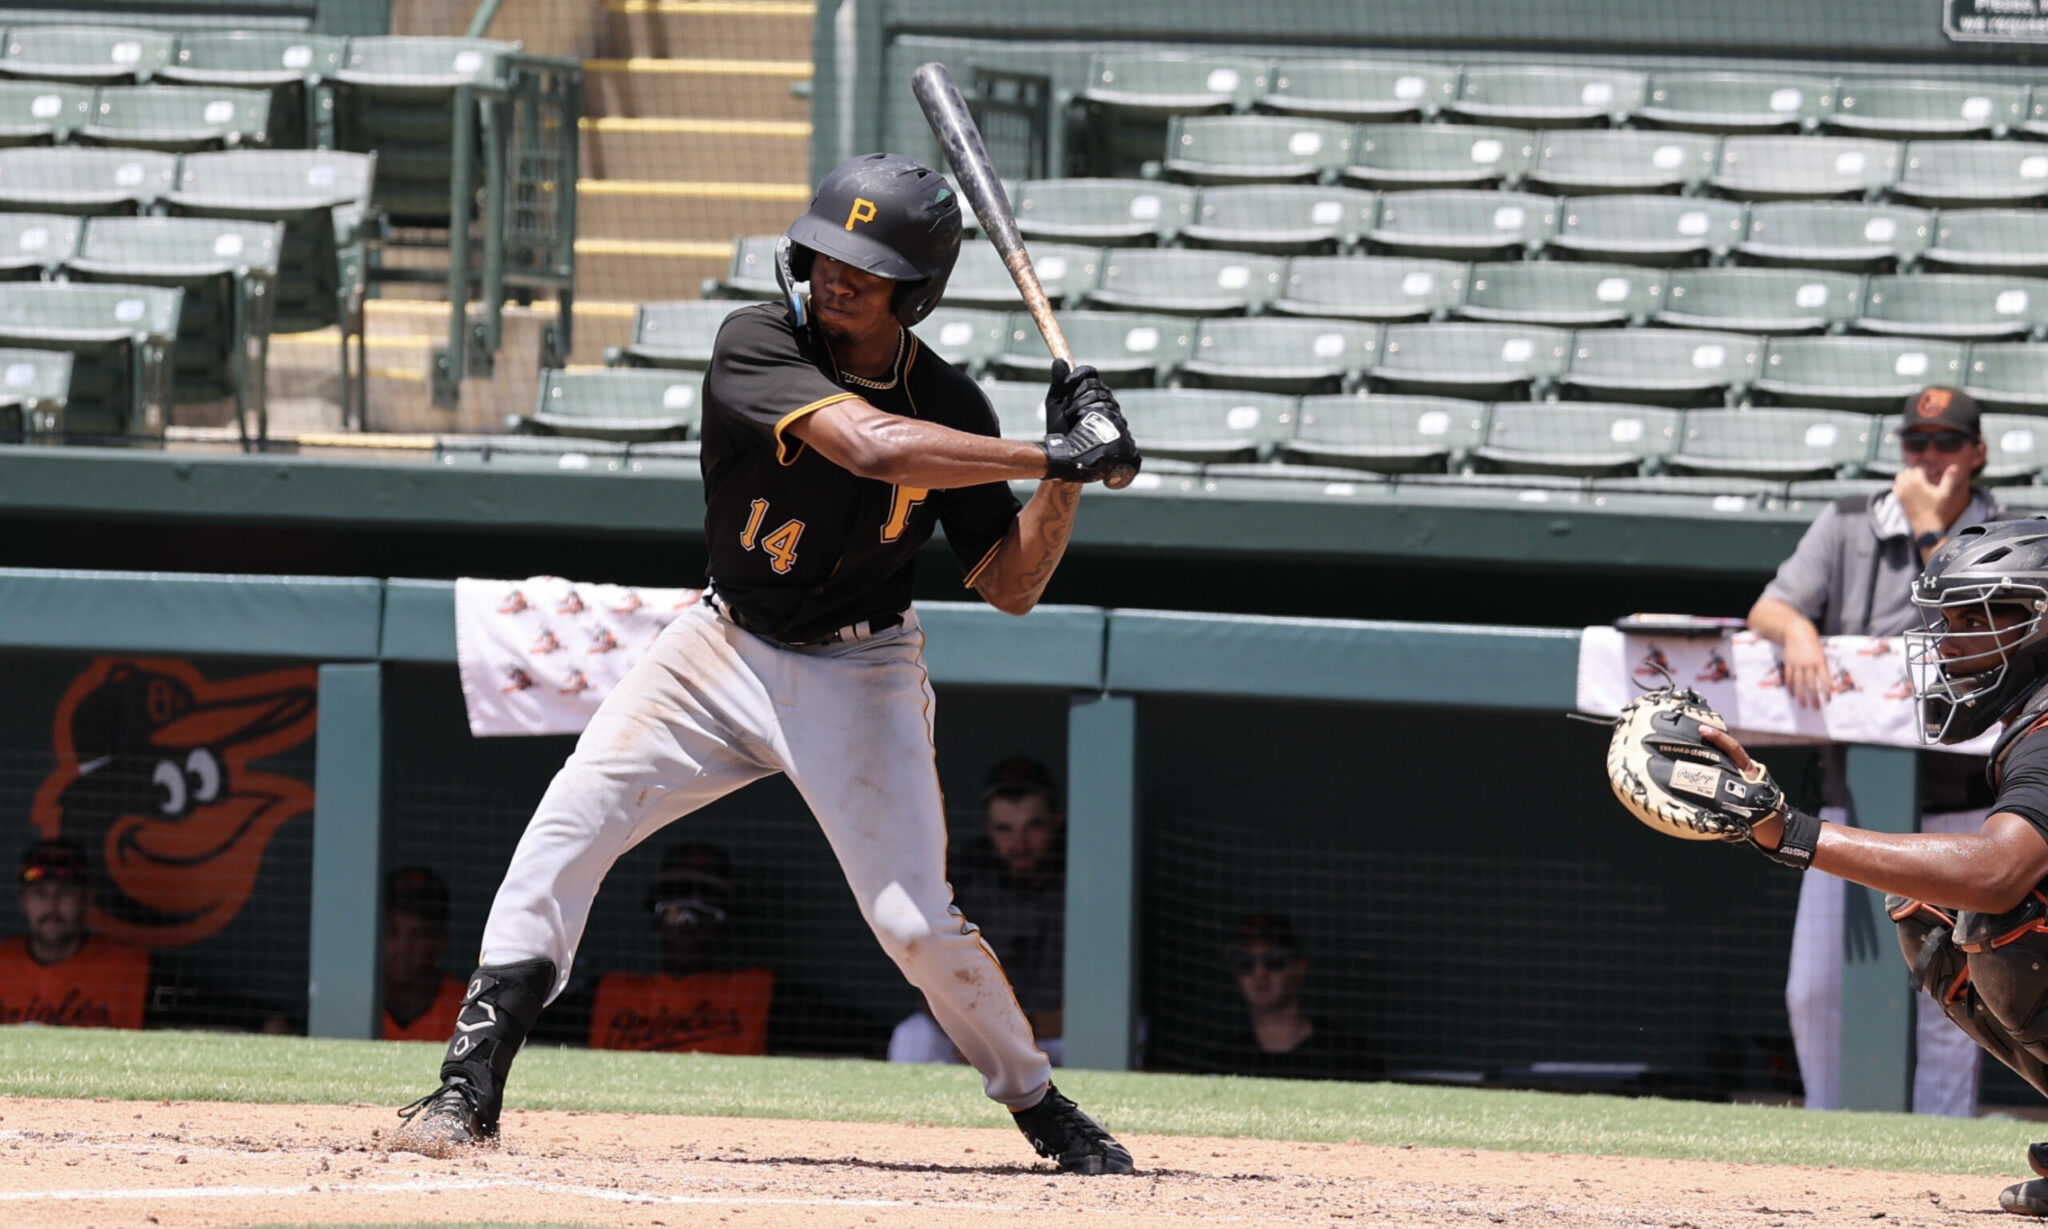 Pirates Prospects Daily: Braylon Bishop Still Looking To Put Raw Power On Display